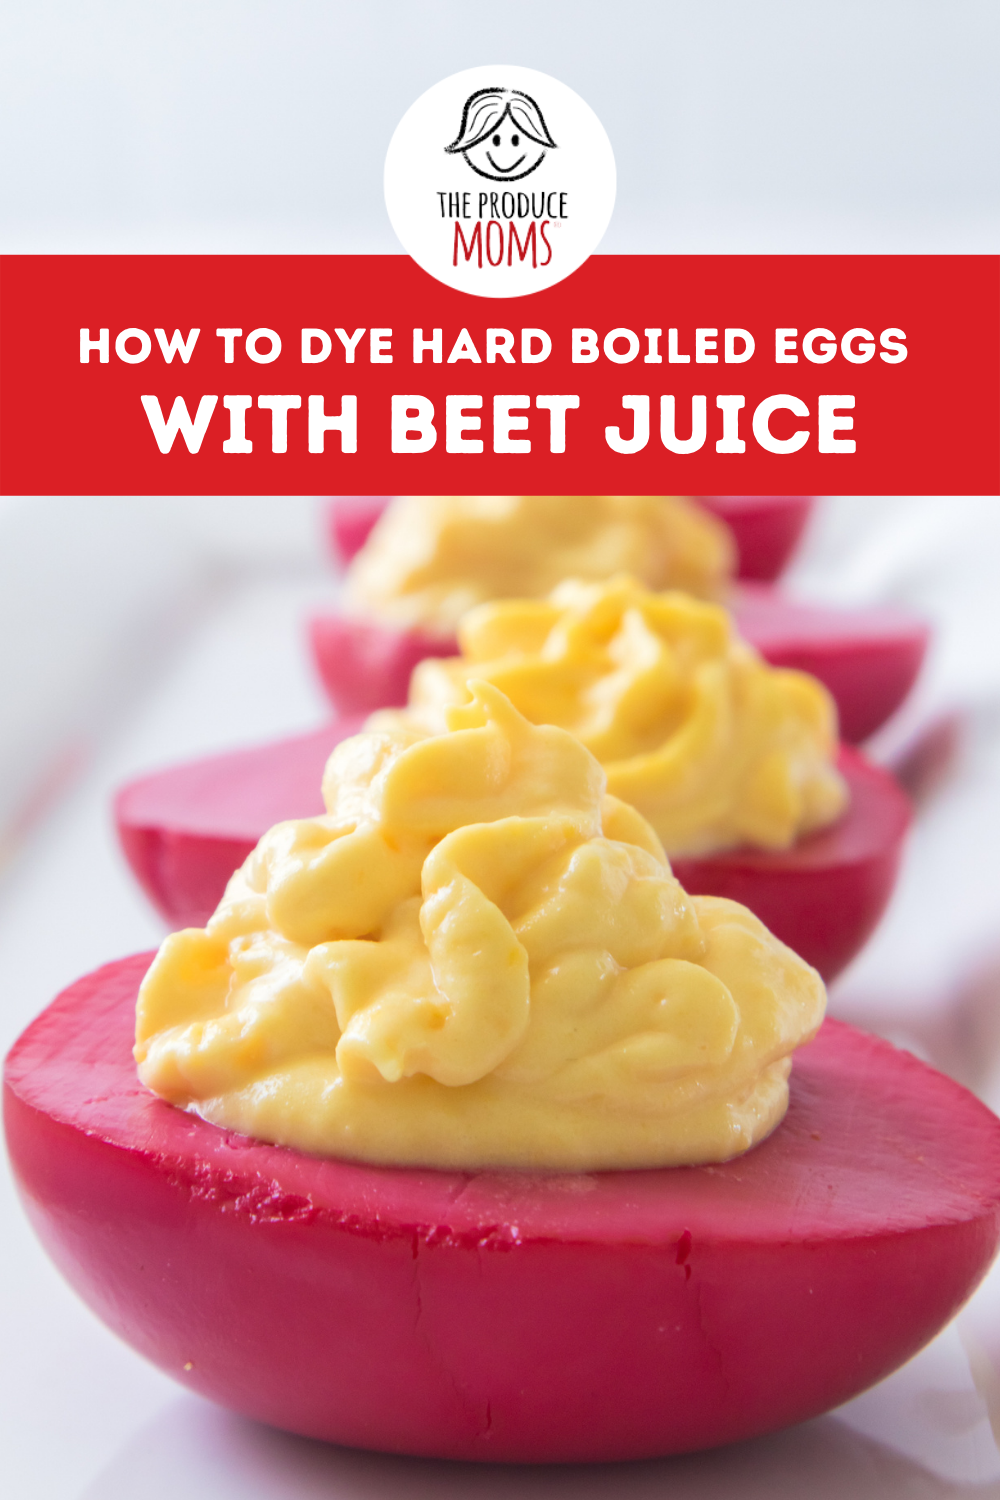 Pinterest Pin showing hard boiled eggs dyed by beet juice